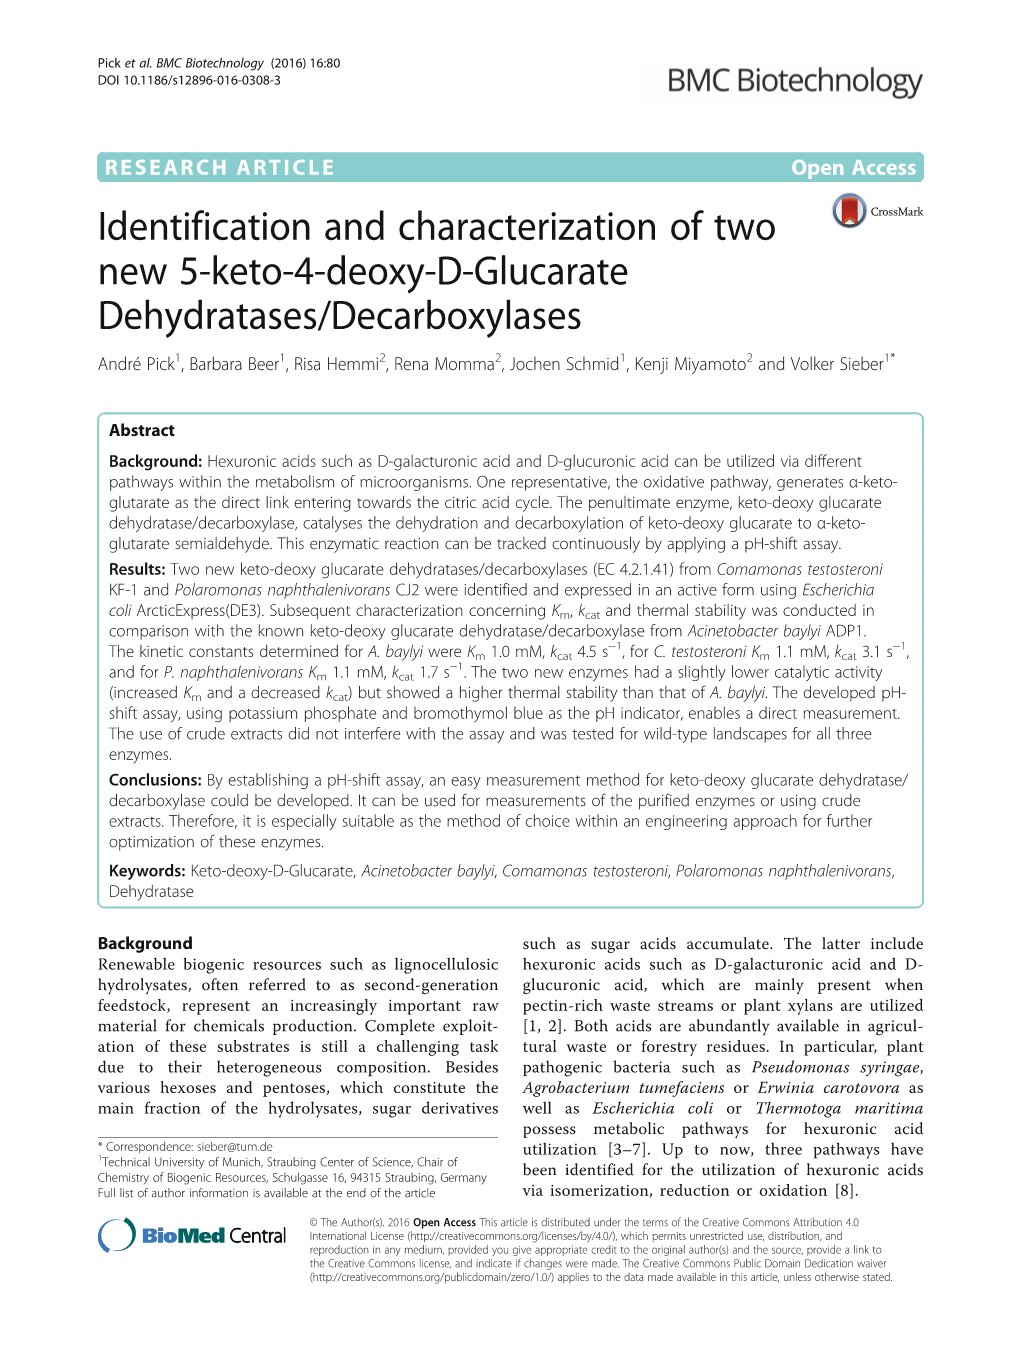 Identification and Characterization of Two New 5-Keto-4-Deoxy-D-Glucarate Dehydratases/Decarboxylases